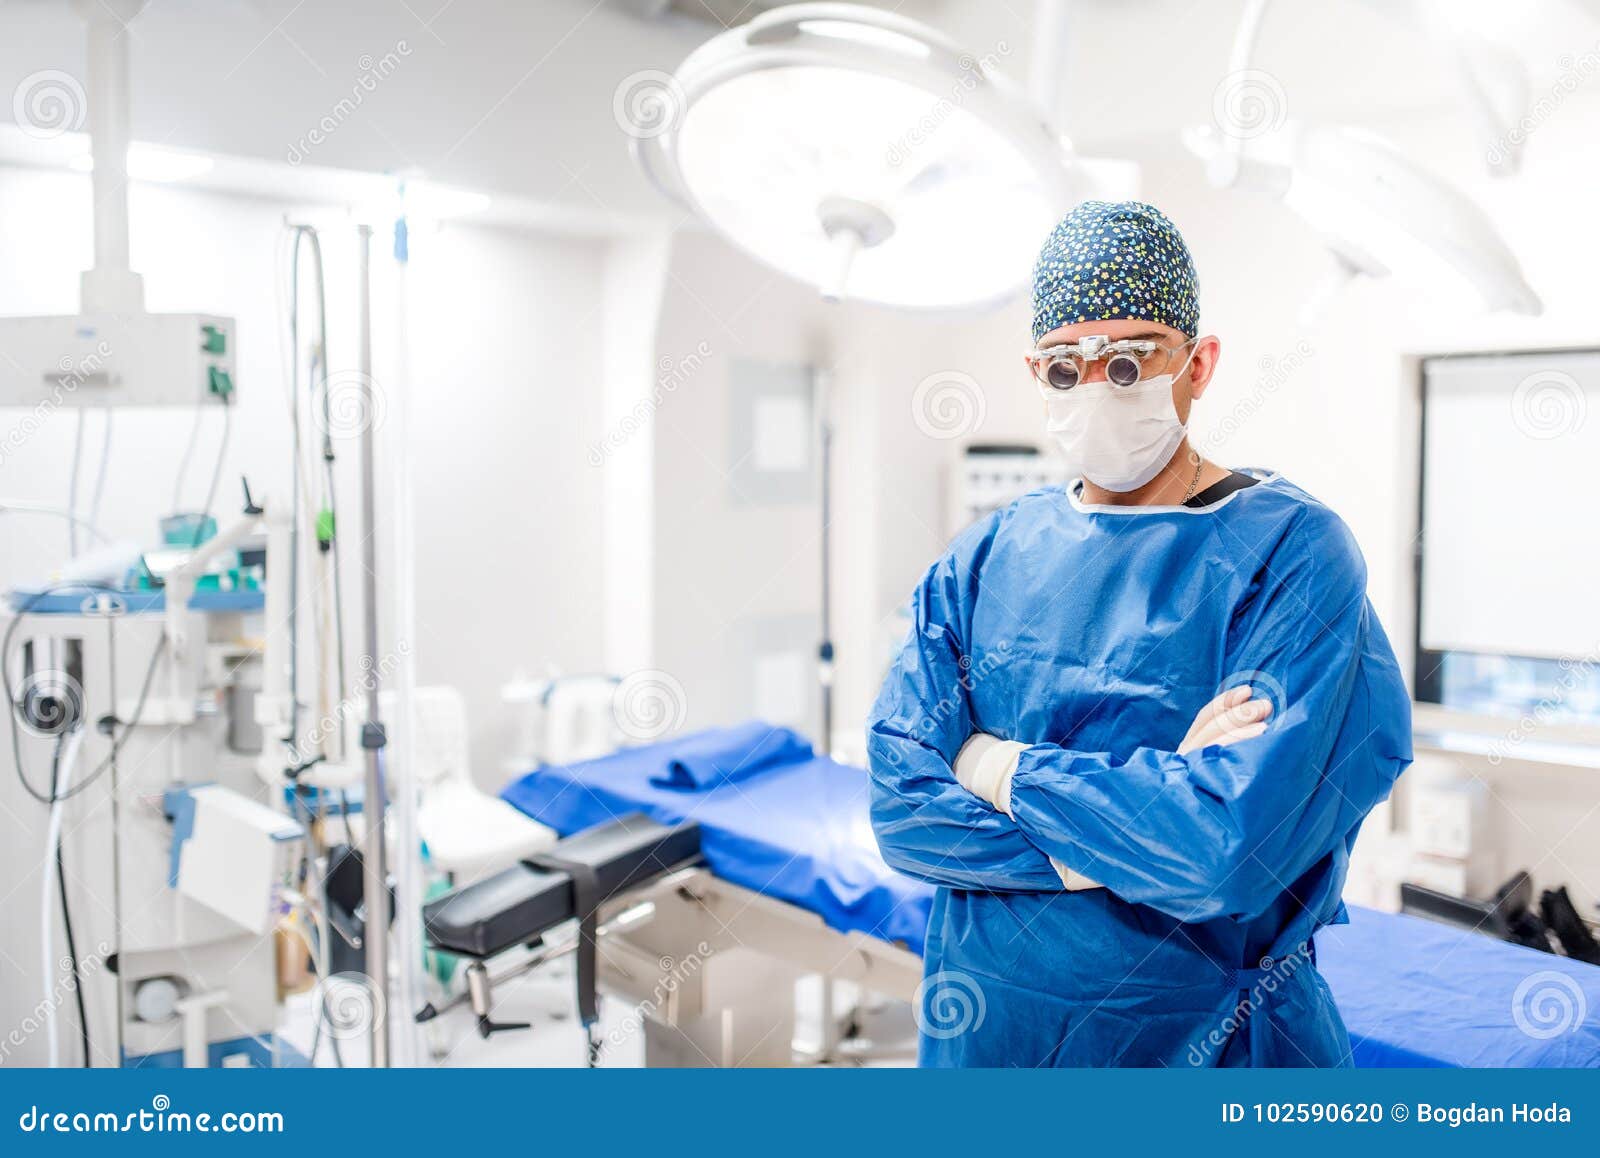 portrait of male surgeon in operating room with surgery lights on and medical devices. modern hospital details